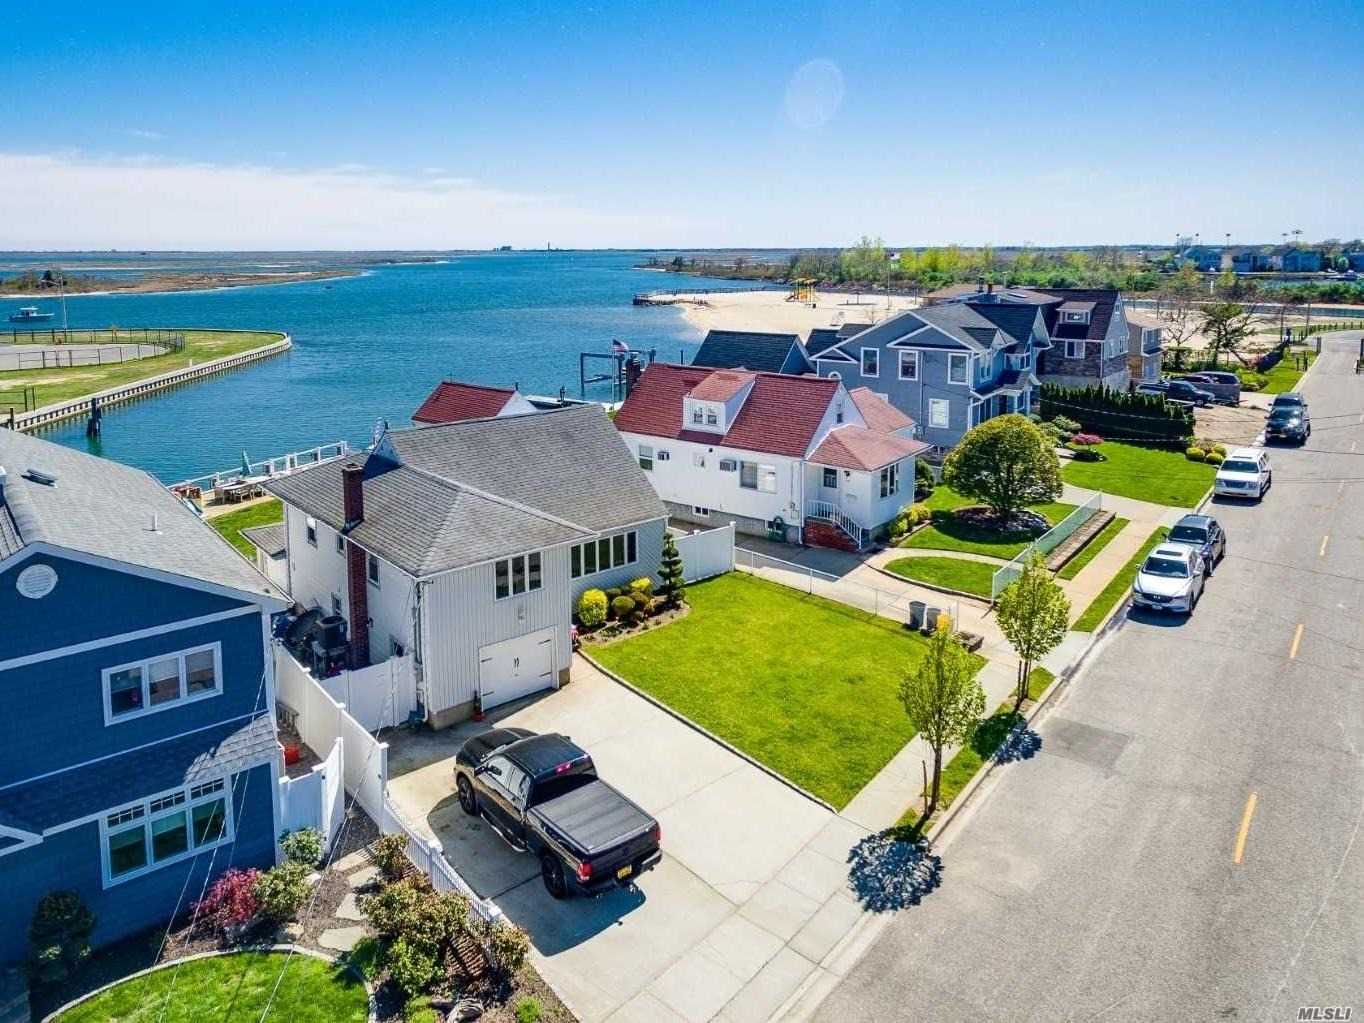 Completely-Renovated, Cozy Split-Style Home Right Off The Bay But With The Protection Of A Canal-- Perfect For Any Boater! Located Within Gorgeous Massapequa Shores & Sits On Pristine Block Filled W/ Nice Homes. Breathtaking Bayviews Complemented By Florence Beach A Mire Footsteps Away! This Like-Brand-New Home Includes: Custom Kitchen & Vanities W/ Granite Ctops + Ss Prof Appliances (Gas), Gleaming Oak Floors, Lots Of Closet Space, New Dock & Pvc-Faced Bulkhead In Mint Condition, + Much More!